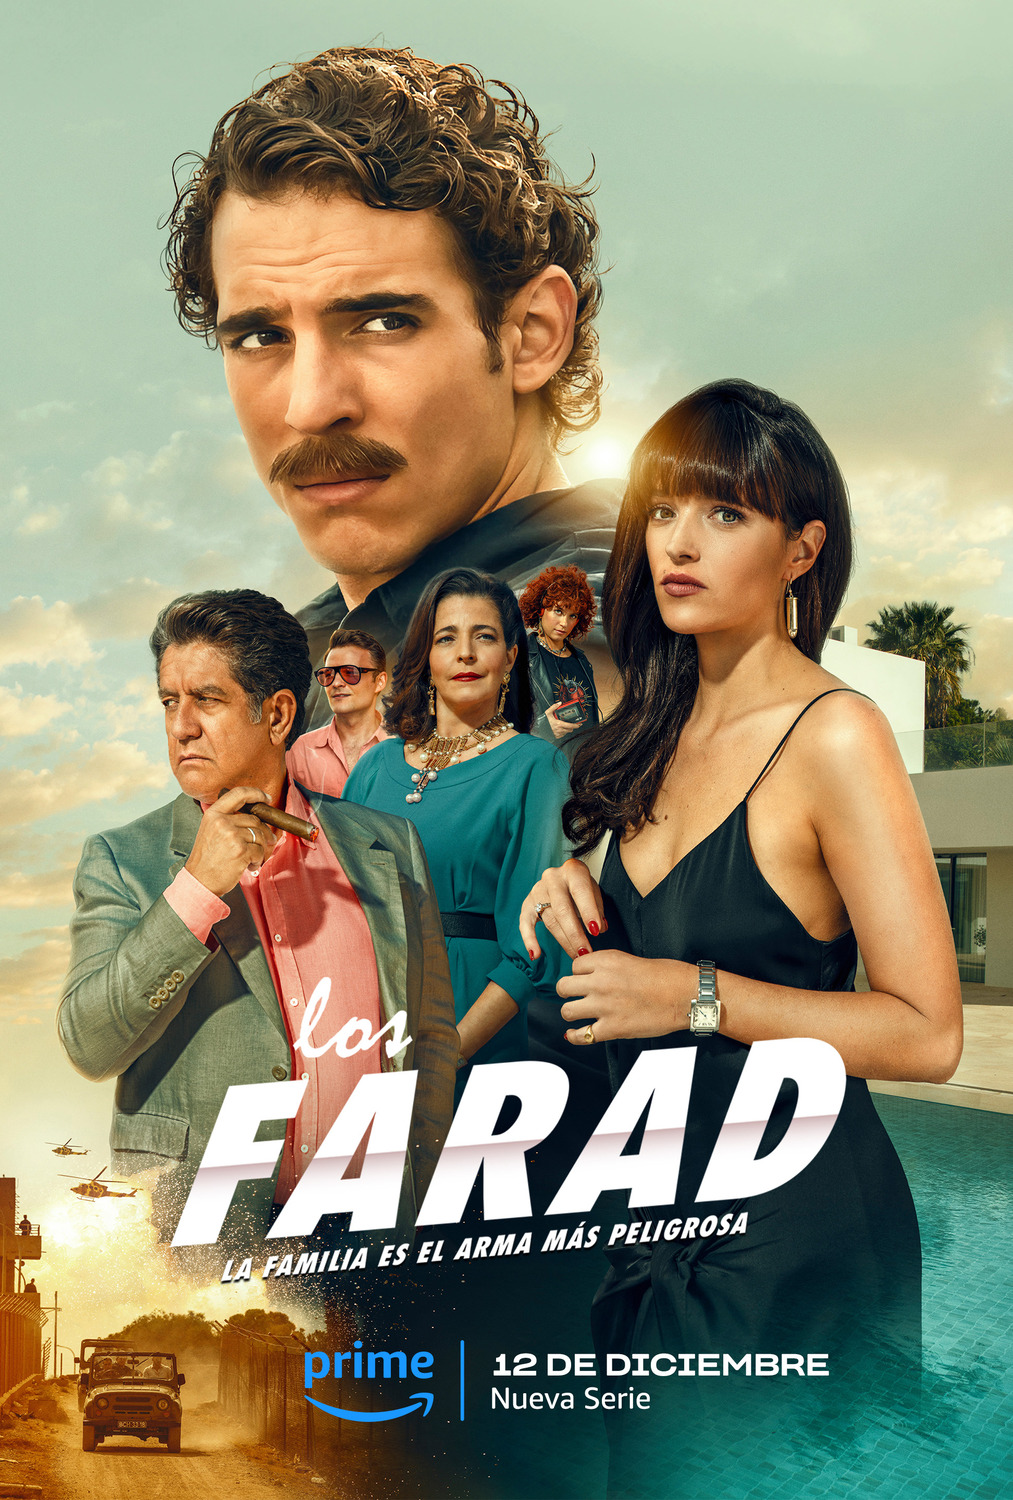 Extra Large TV Poster Image for Los Farad 